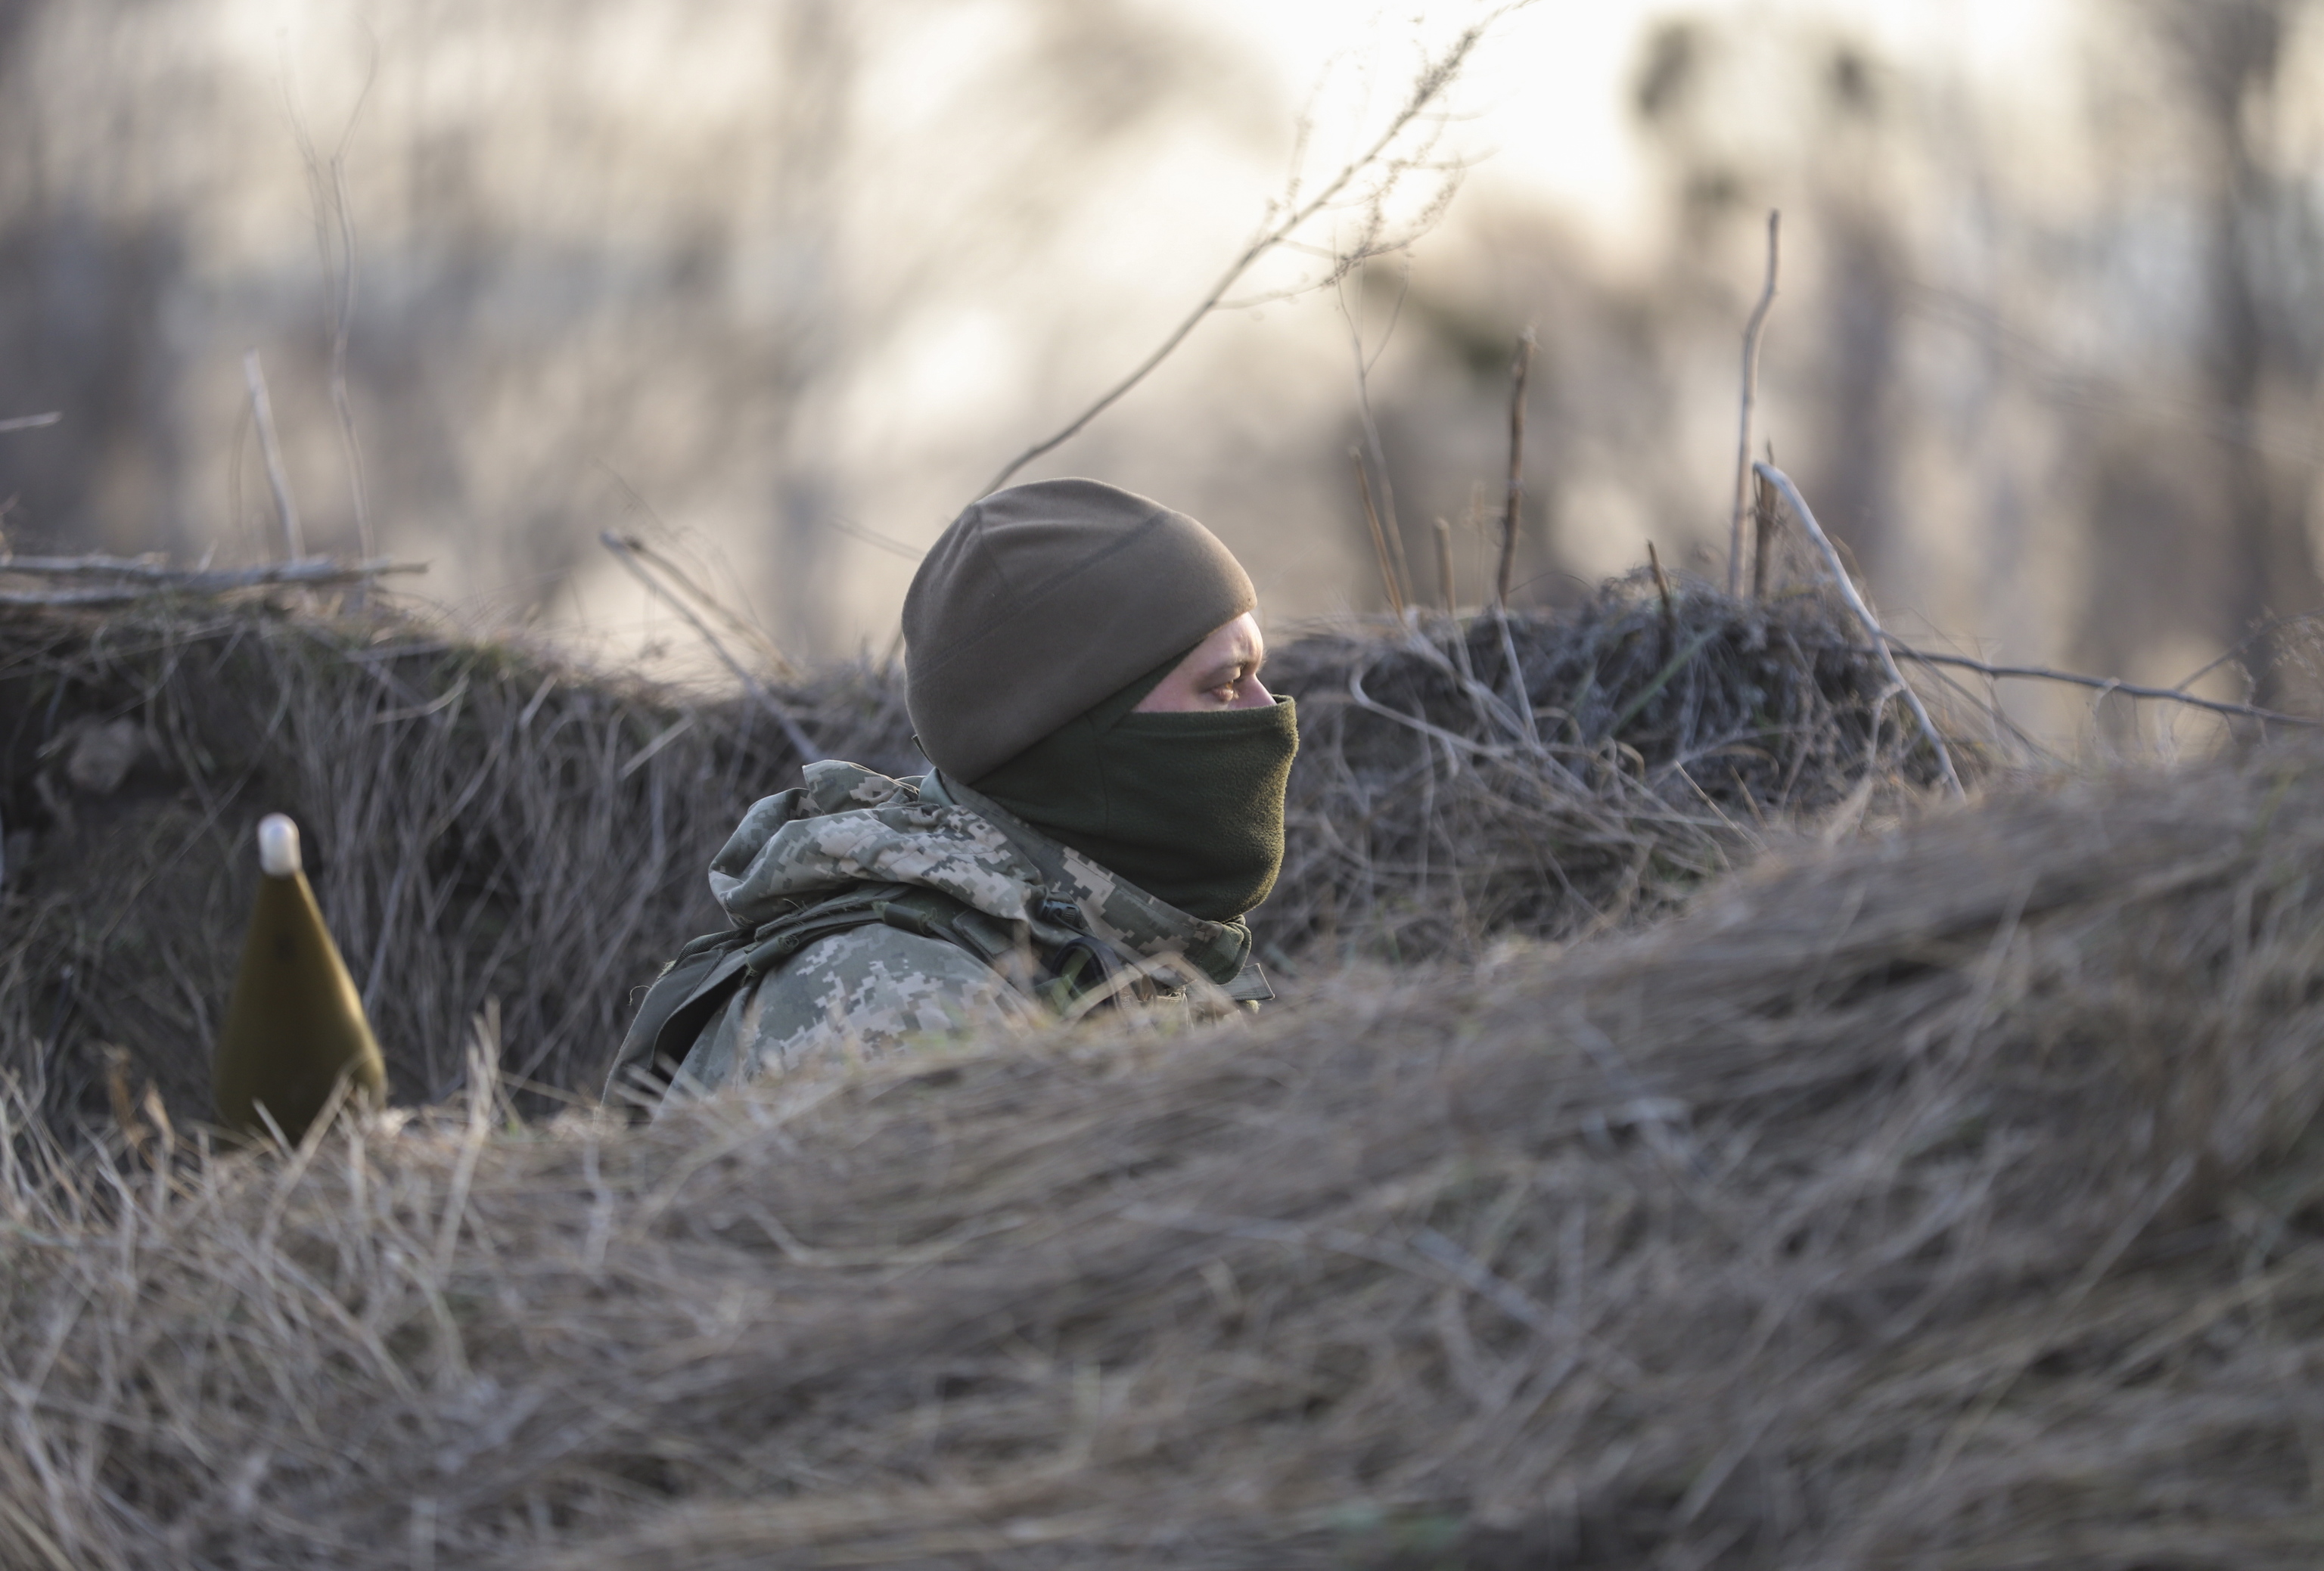 lt;HIT gt;Kiev lt;/HIT gt; (Ukraine), 26/02/2022.- A Ukrainian serviceman takes up position to defend near of  lt;HIT gt;Kiev lt;/HIT gt;, Ukraine, 26 February 2022. Russian troops launched a major military operation on Ukraine on 24 February, after weeks of intense diplomacy and the imposition of Western sanctions on Russia aimed at preventing an armed conflict in Ukraine. (Atentado, Rusia, Ucrania) EFE/EPA/ALISA YAKUBOVYCH